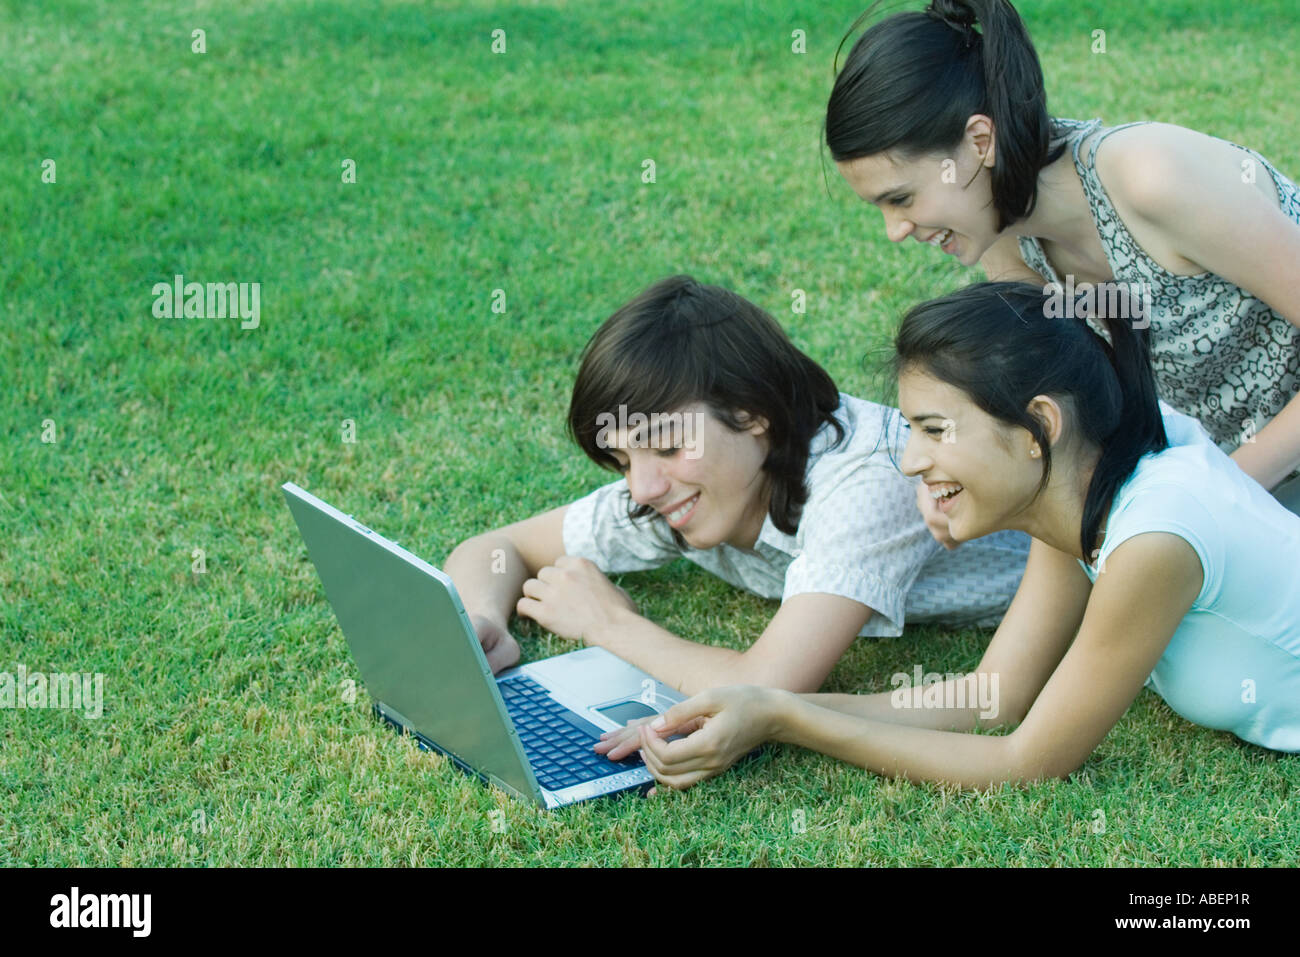 Young friends lying in grass, using laptop together Stock Photo